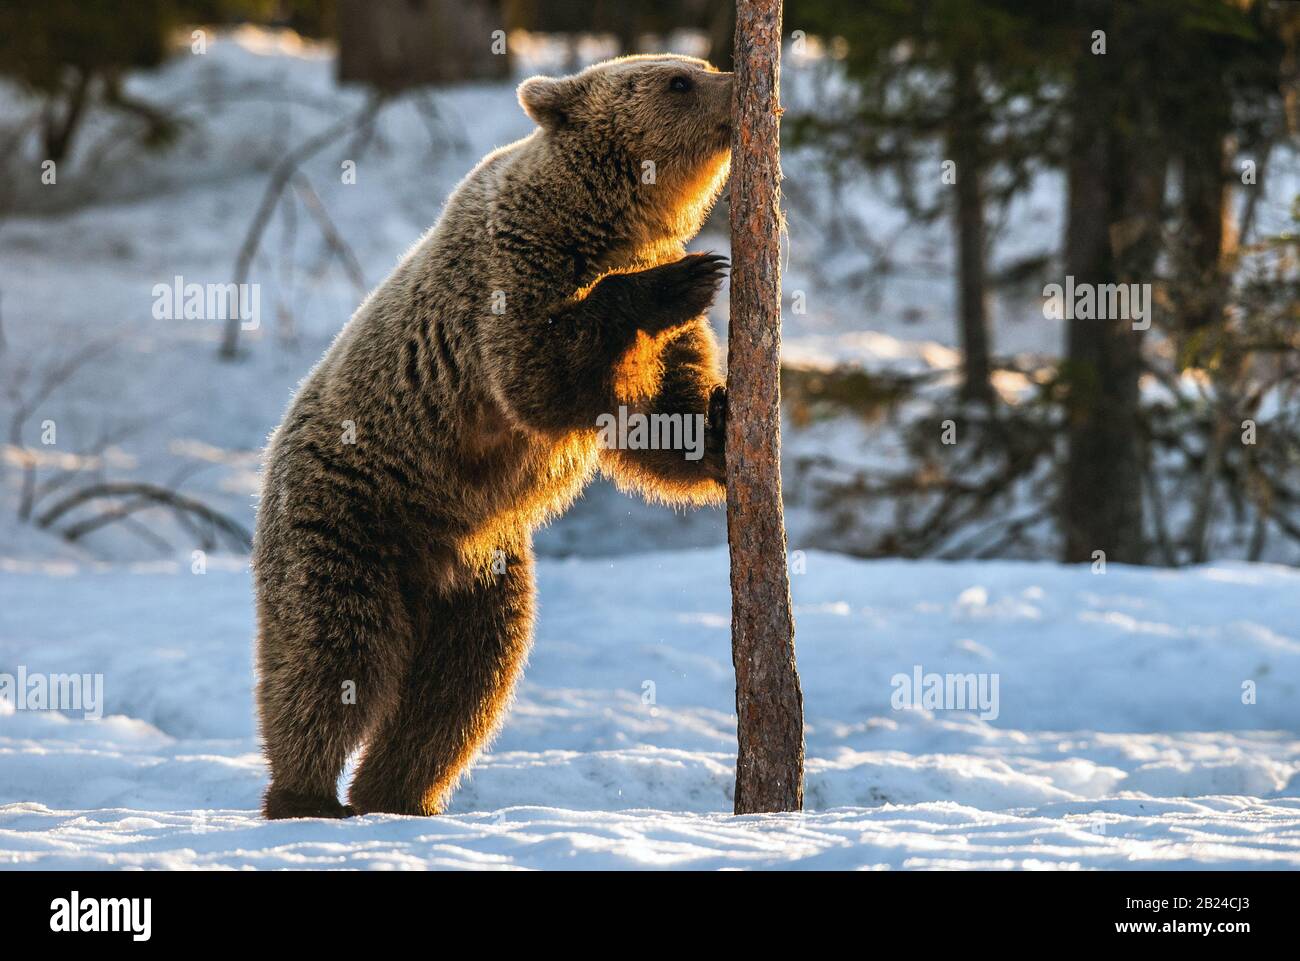 Brown bear stands on its hind legs by a pine tree in winter forest. Scientific name: Ursus arctos. Natural habitat. Winter season. Stock Photo